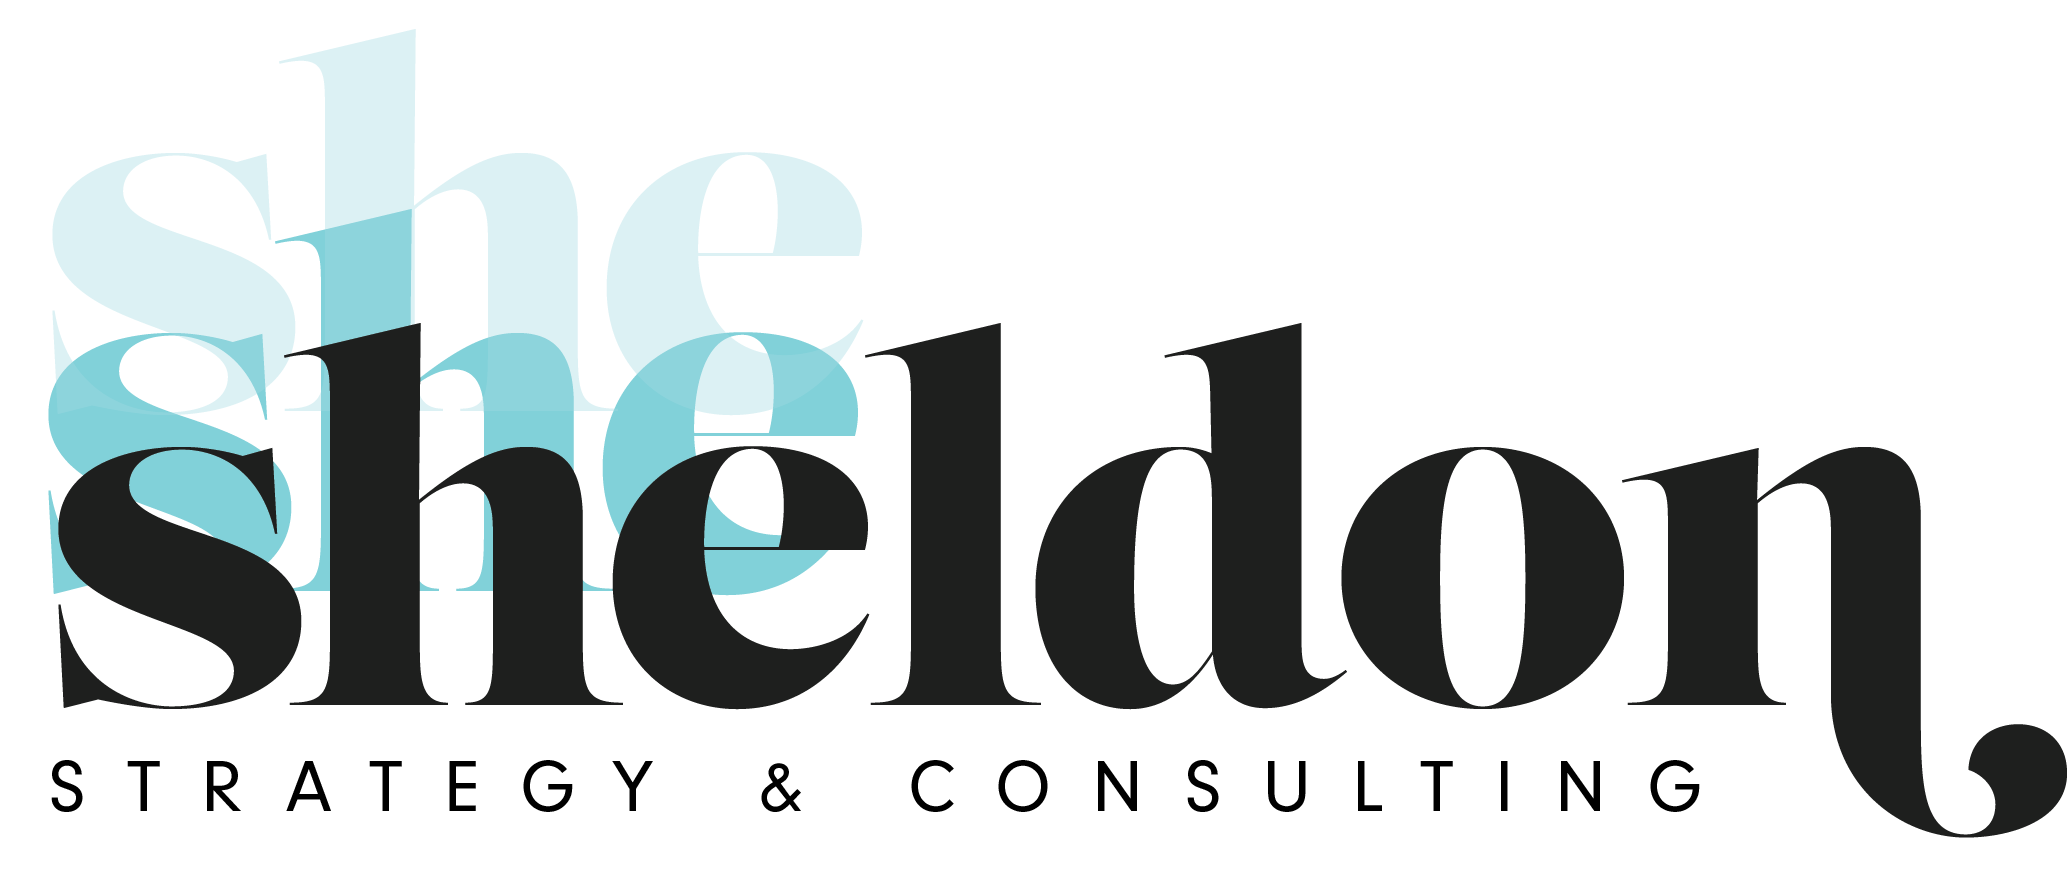 Sheldon Strategy & Consulting